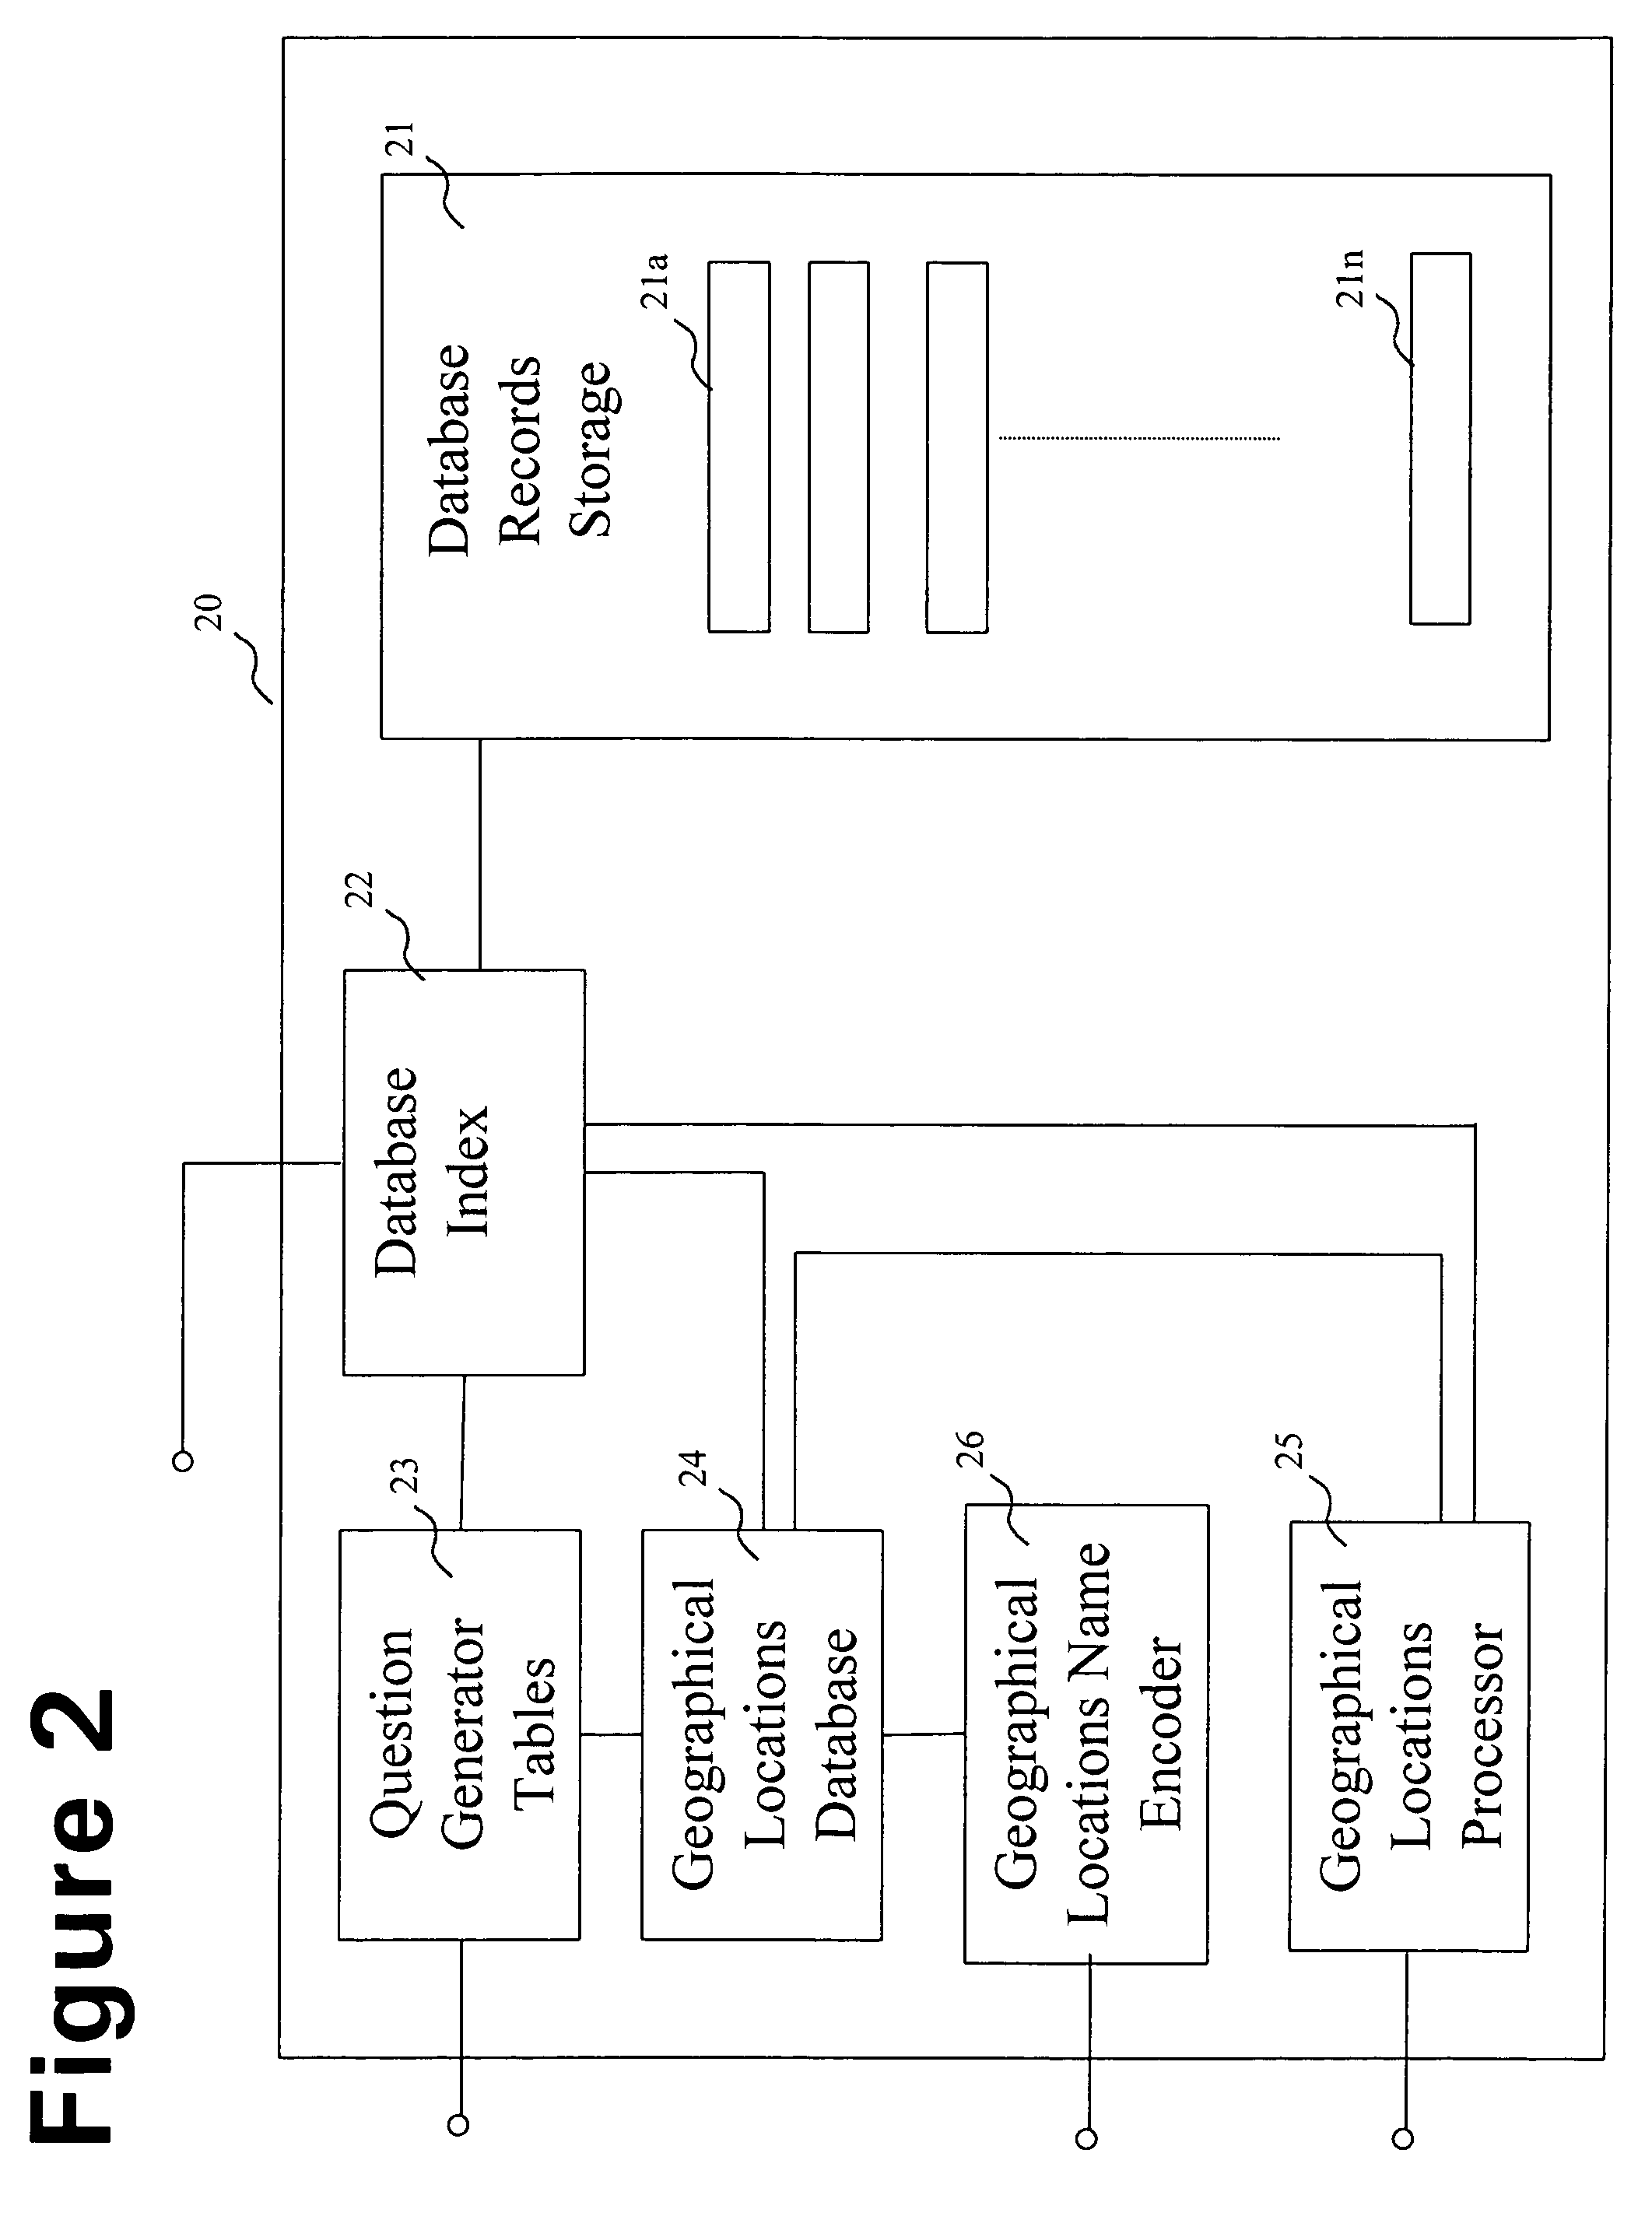 Method and system for searching an information retrieval system according to user-specified location information